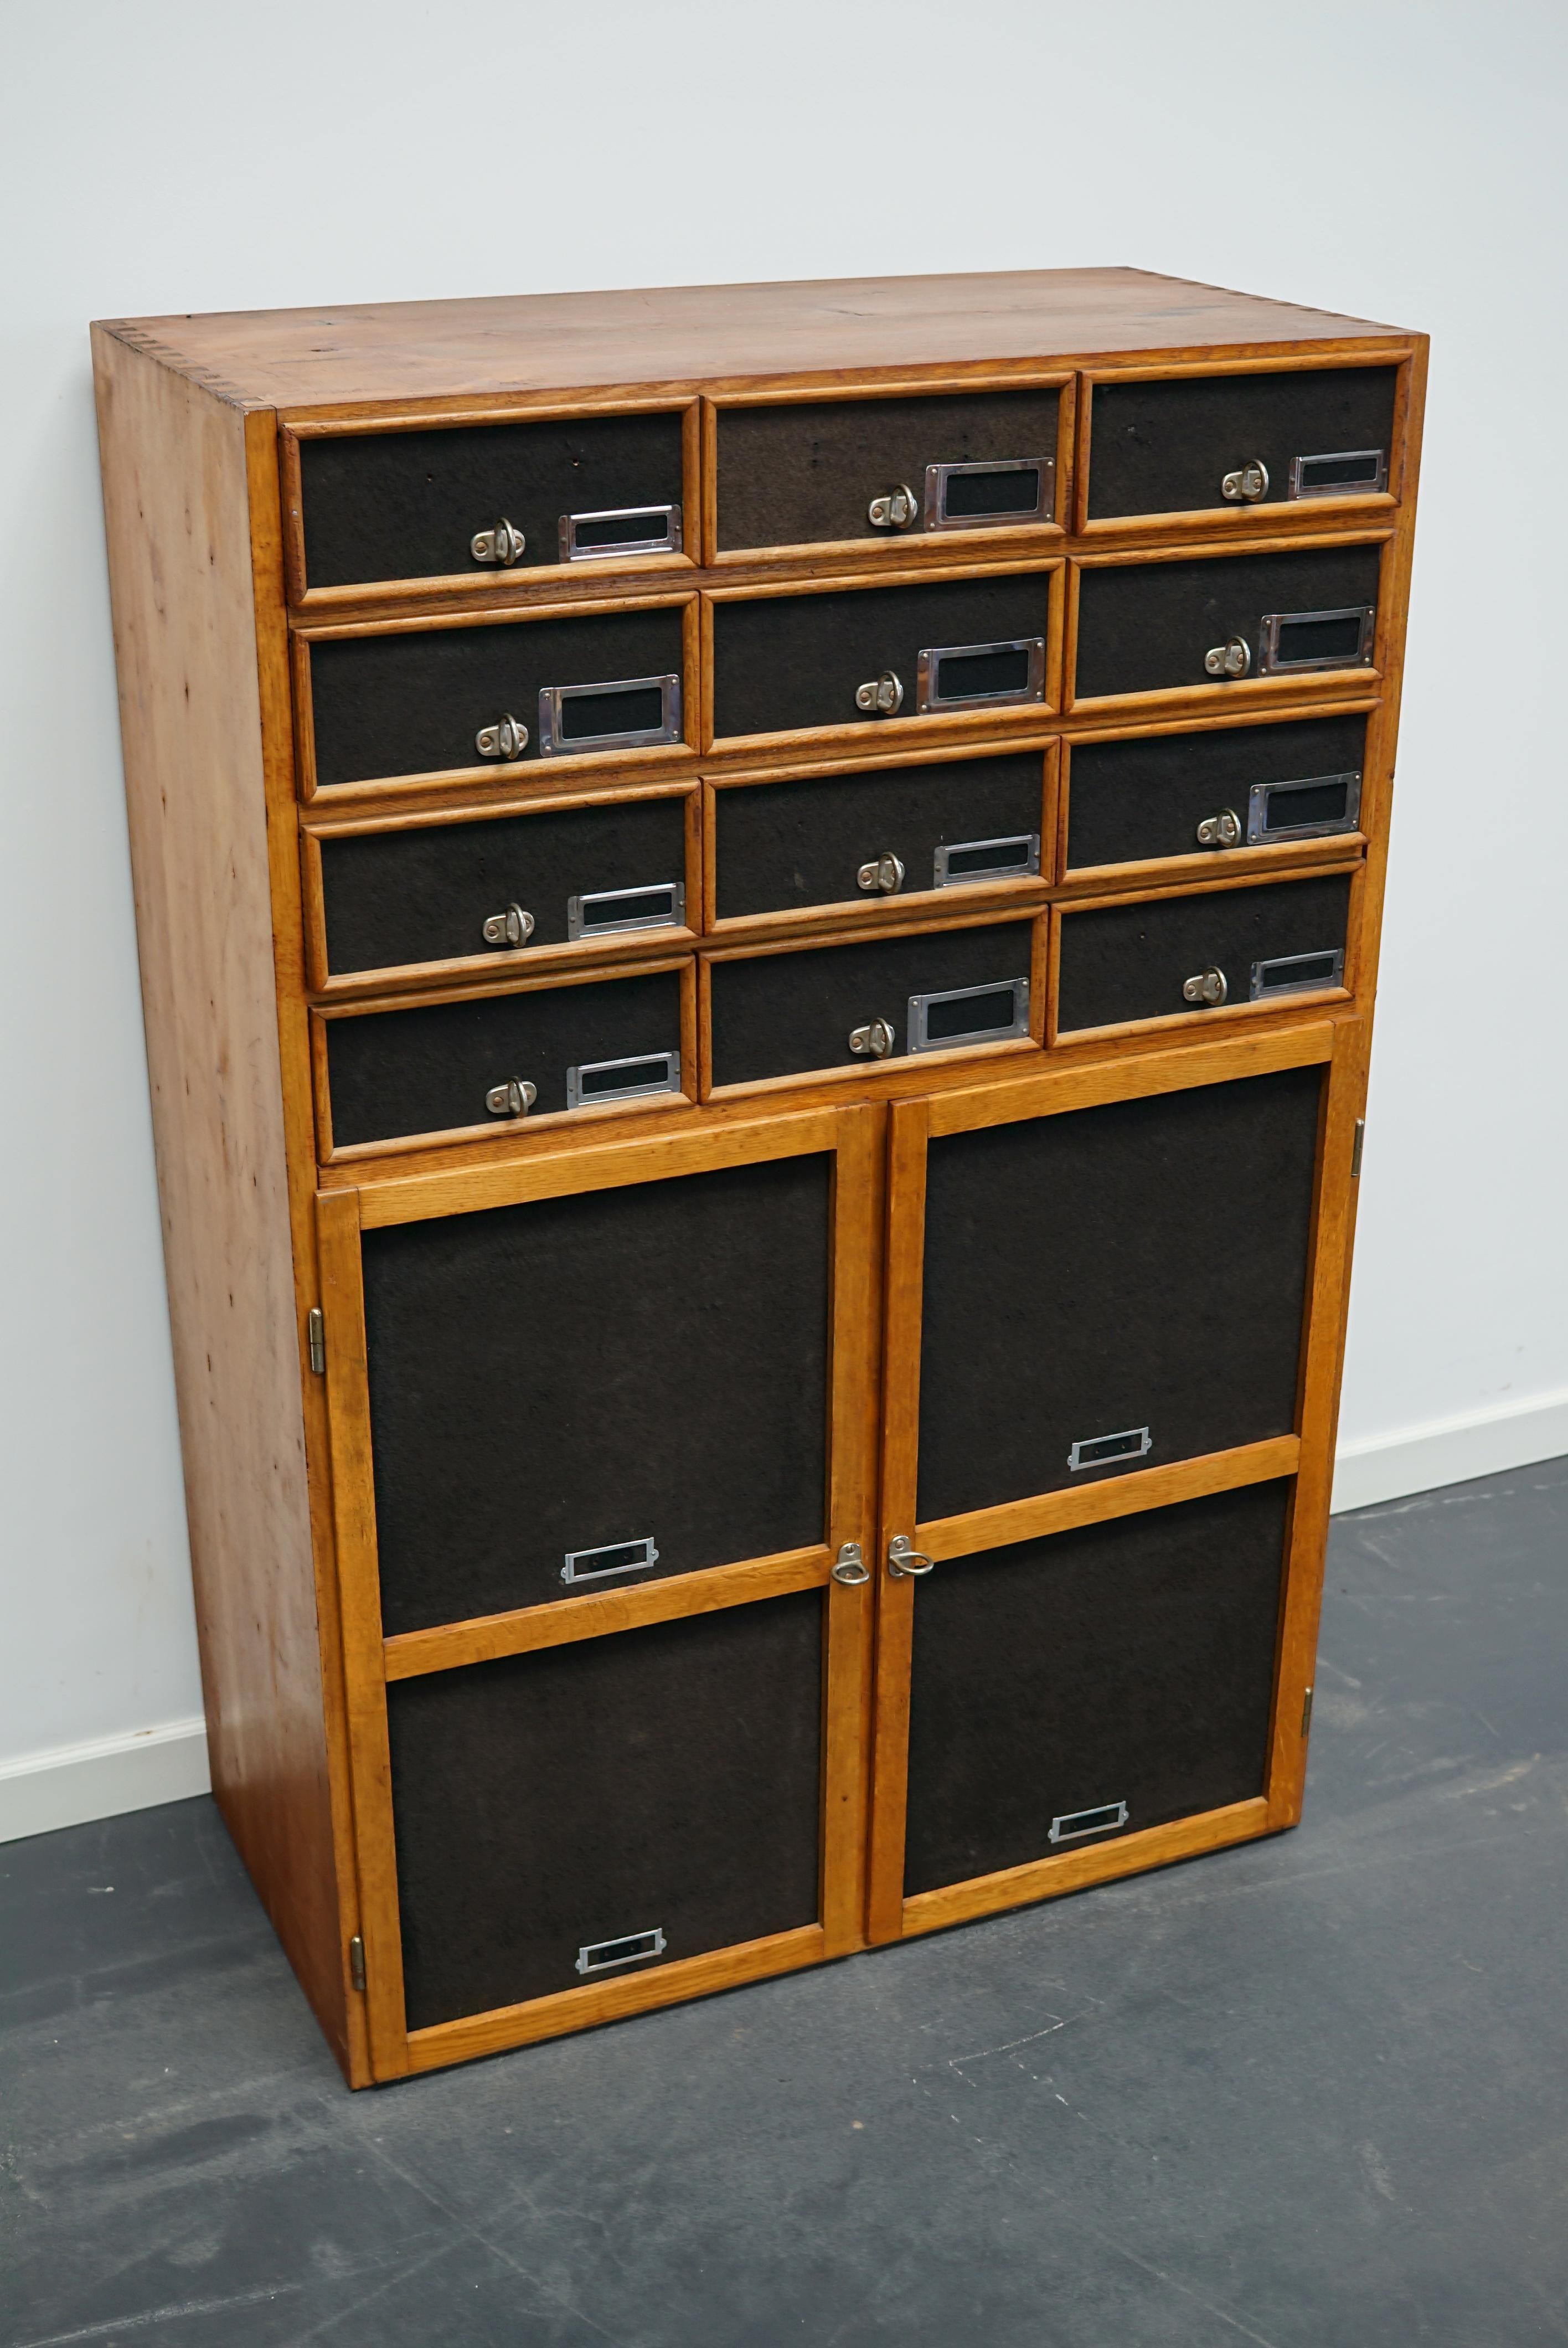 German Industrial Oak and Pine Apothecary Cabinet, Mid-20th Century For Sale 4